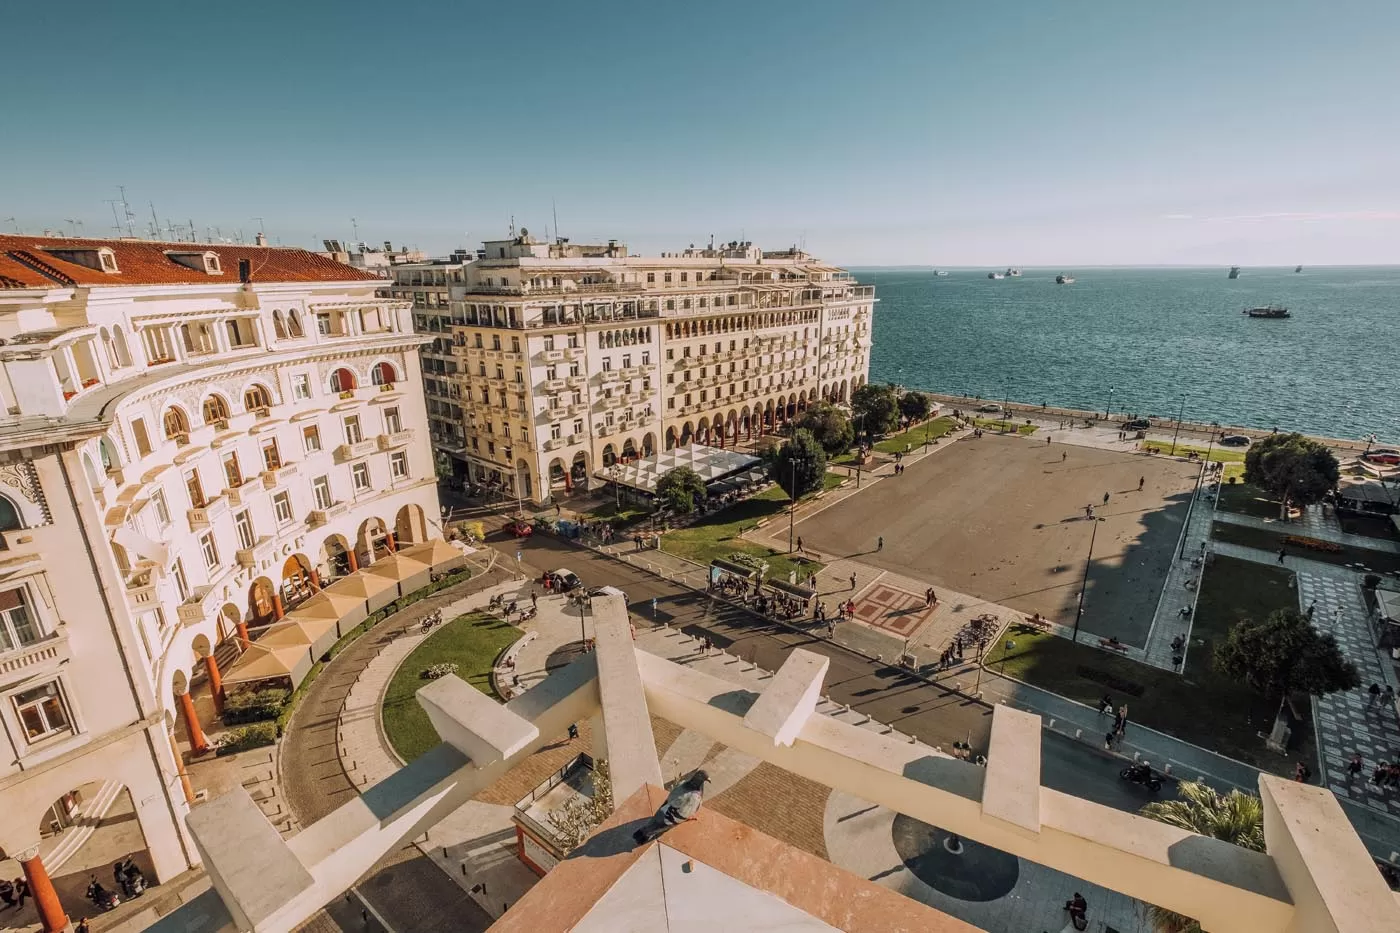 Things to do in Thessaloniki - Orizontes Roof Garden - Overlooking Aristotelous Square